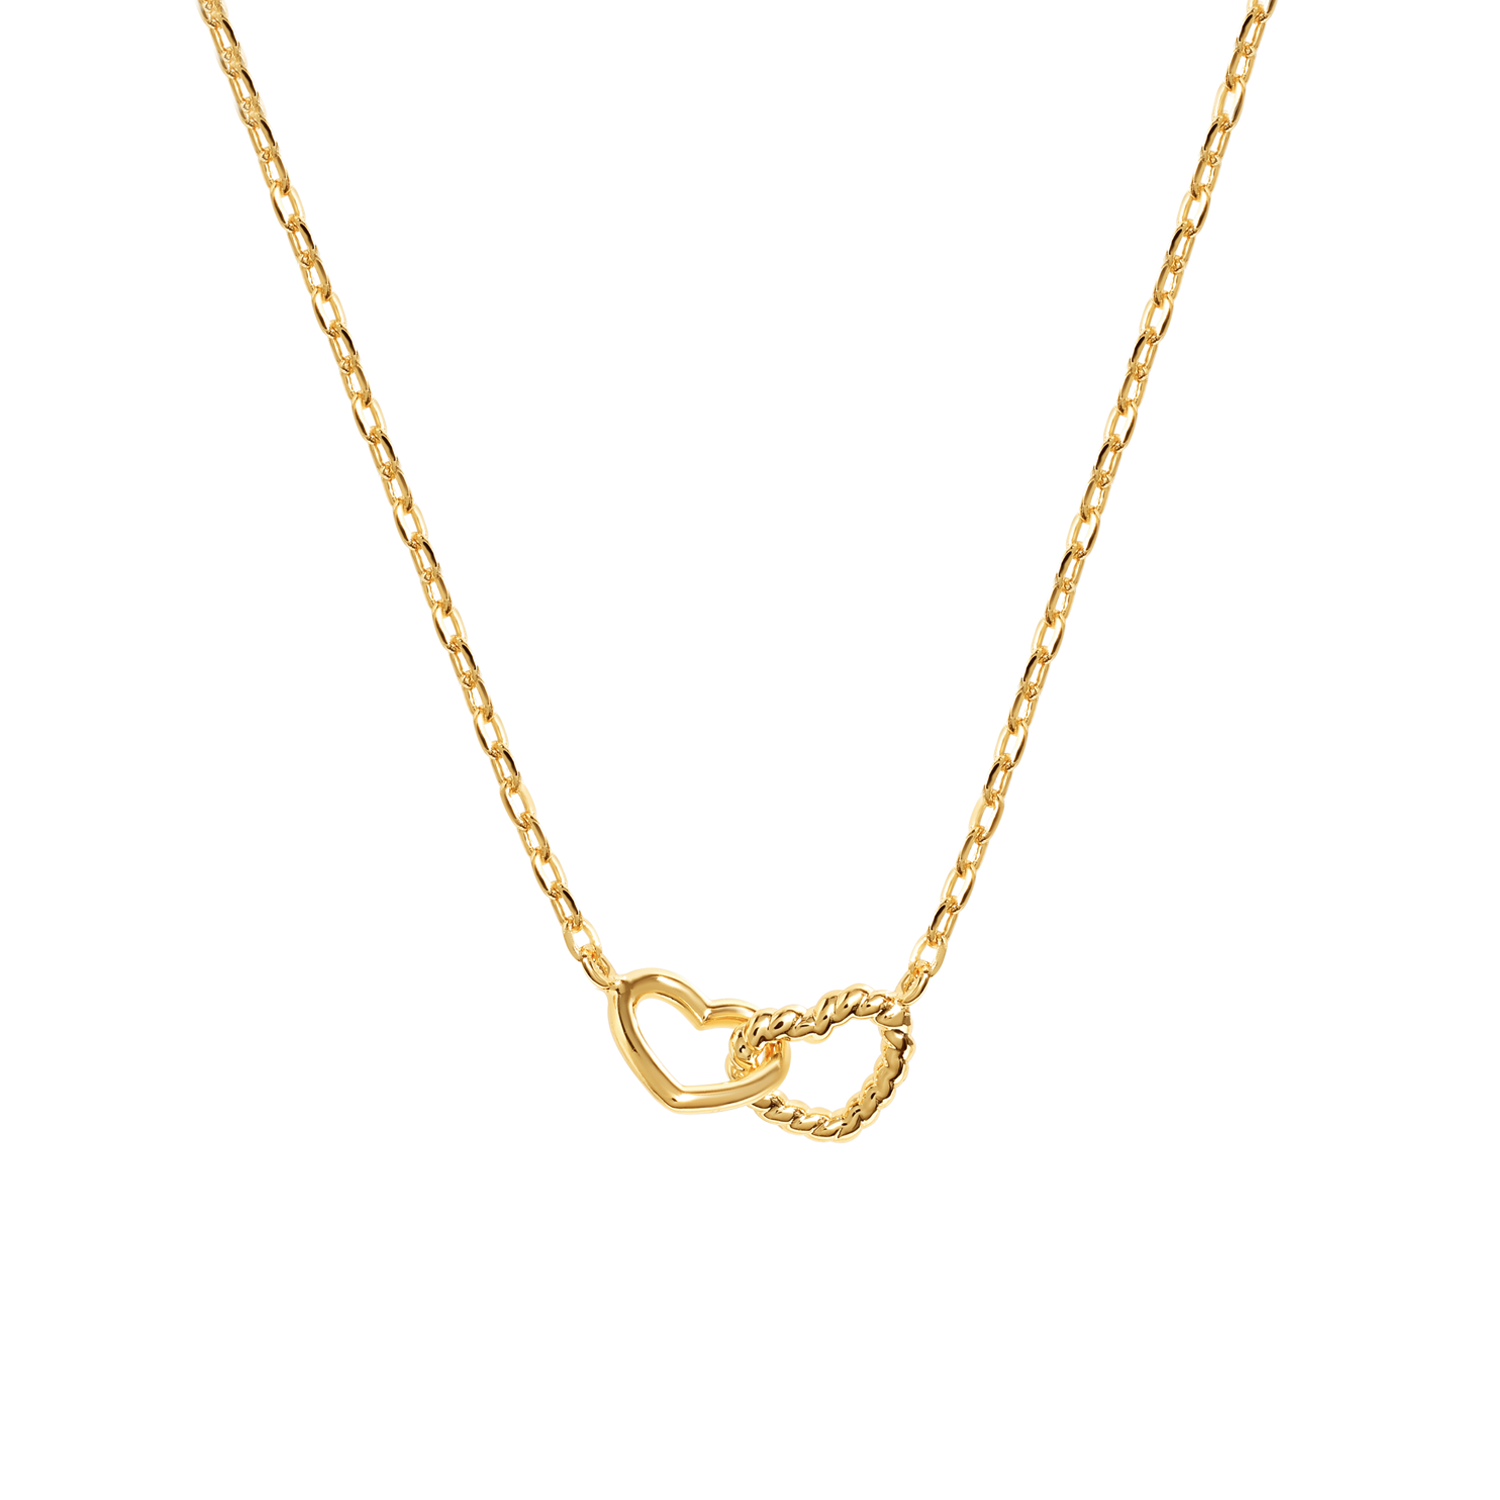 Delicate and charming necklace in gold.